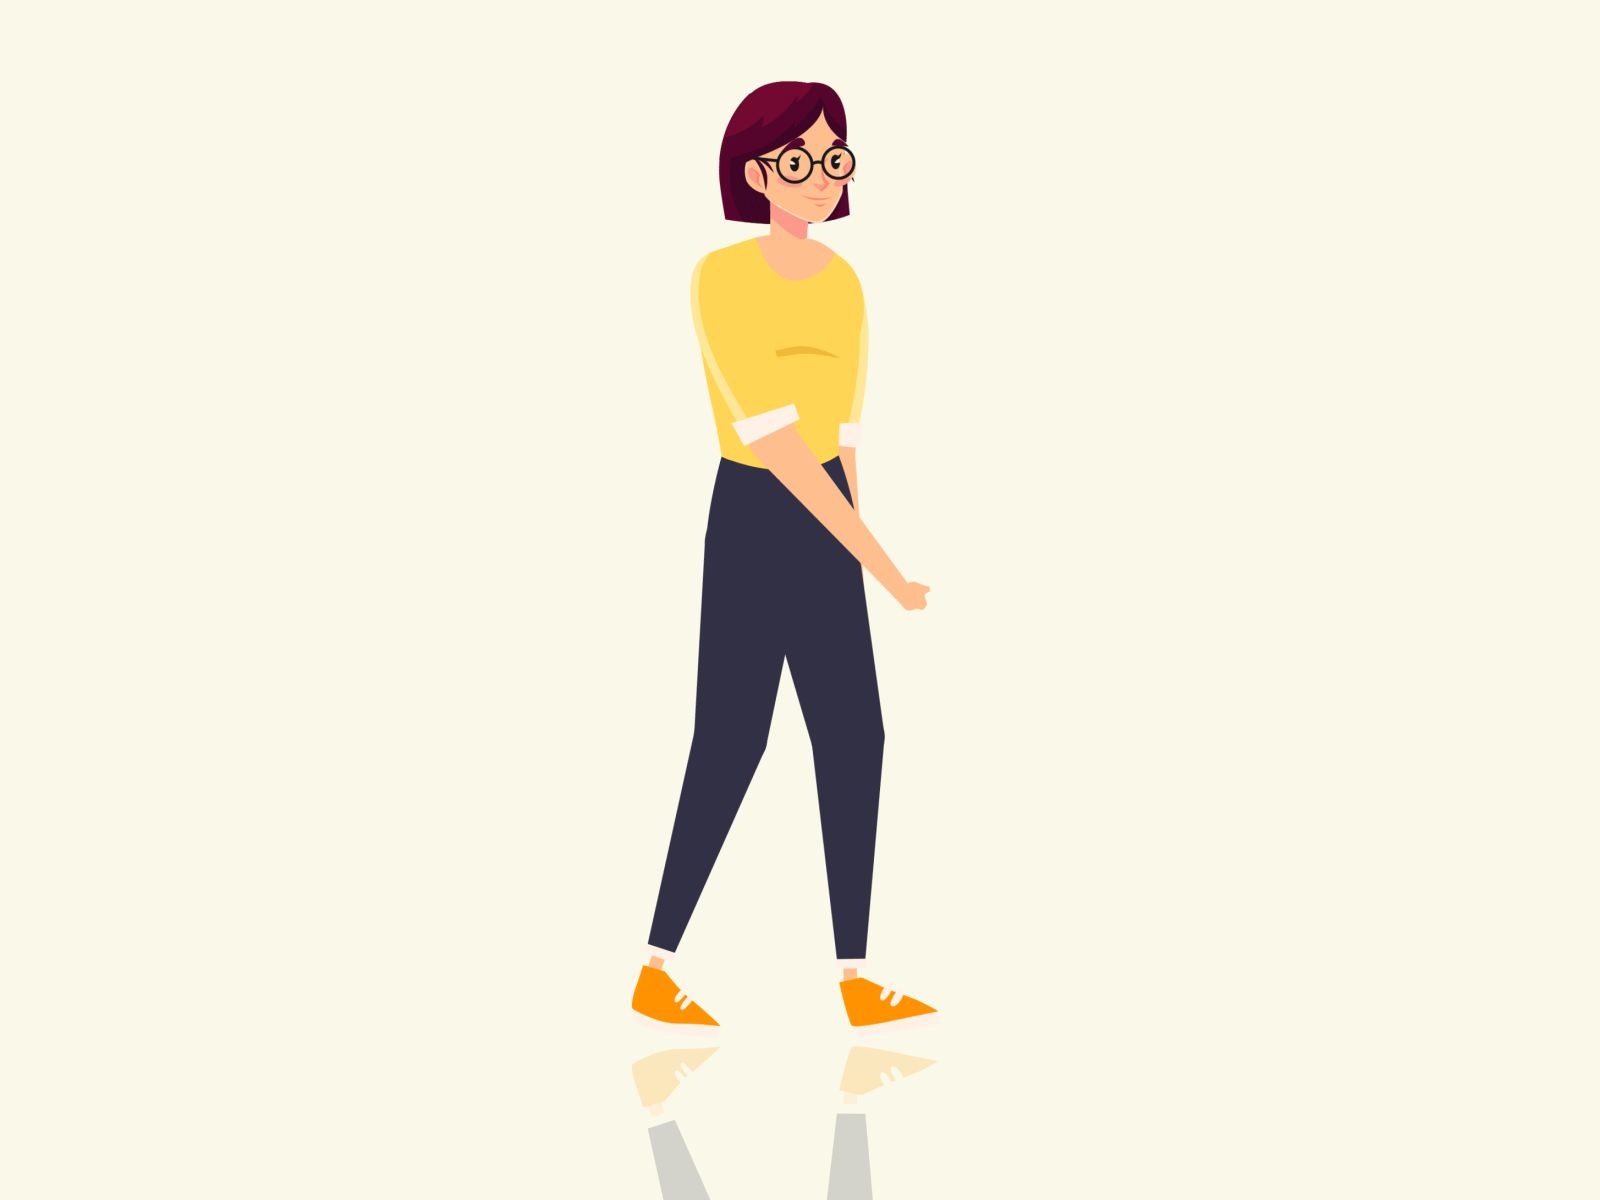 Walk cycle animation - Gif animation After Effects 2d 2d animation after effects animate animation character animation character design design dribbble explainer explainer video gif gif animation illustration loop animation motion motion design motion graphics walk animation walk cycle